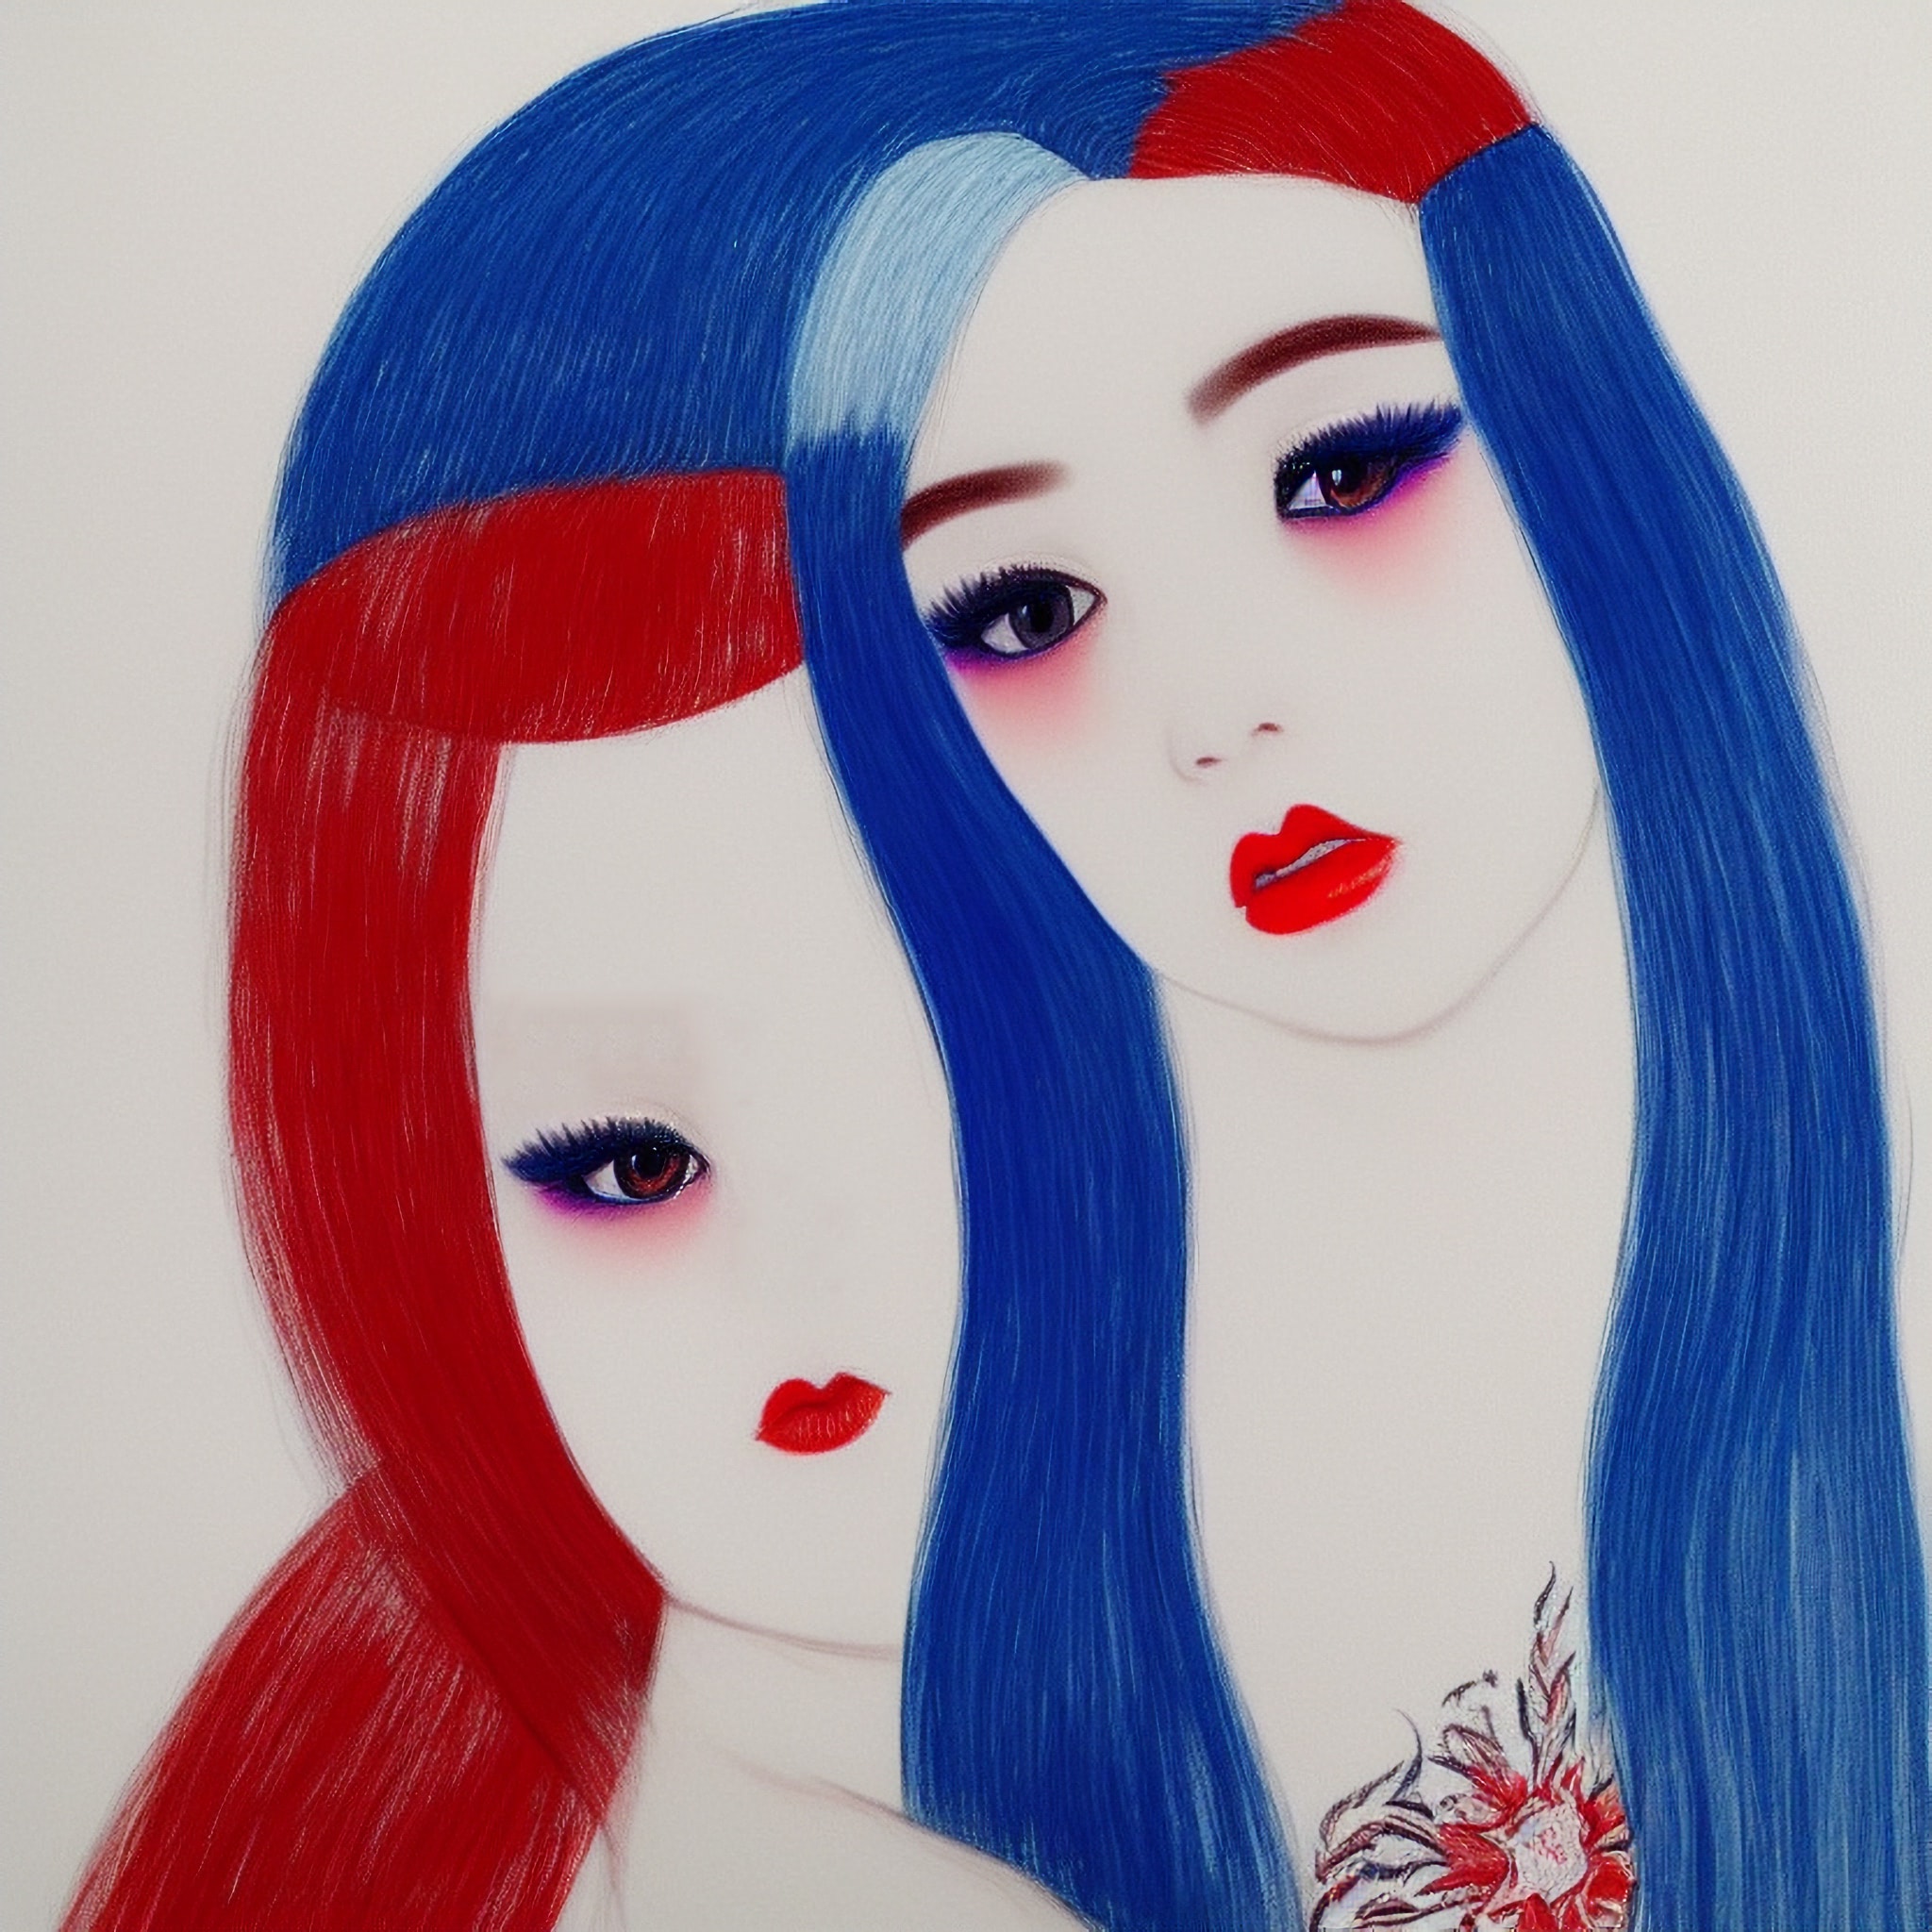 drawing-red-blue-hair-faces-girls